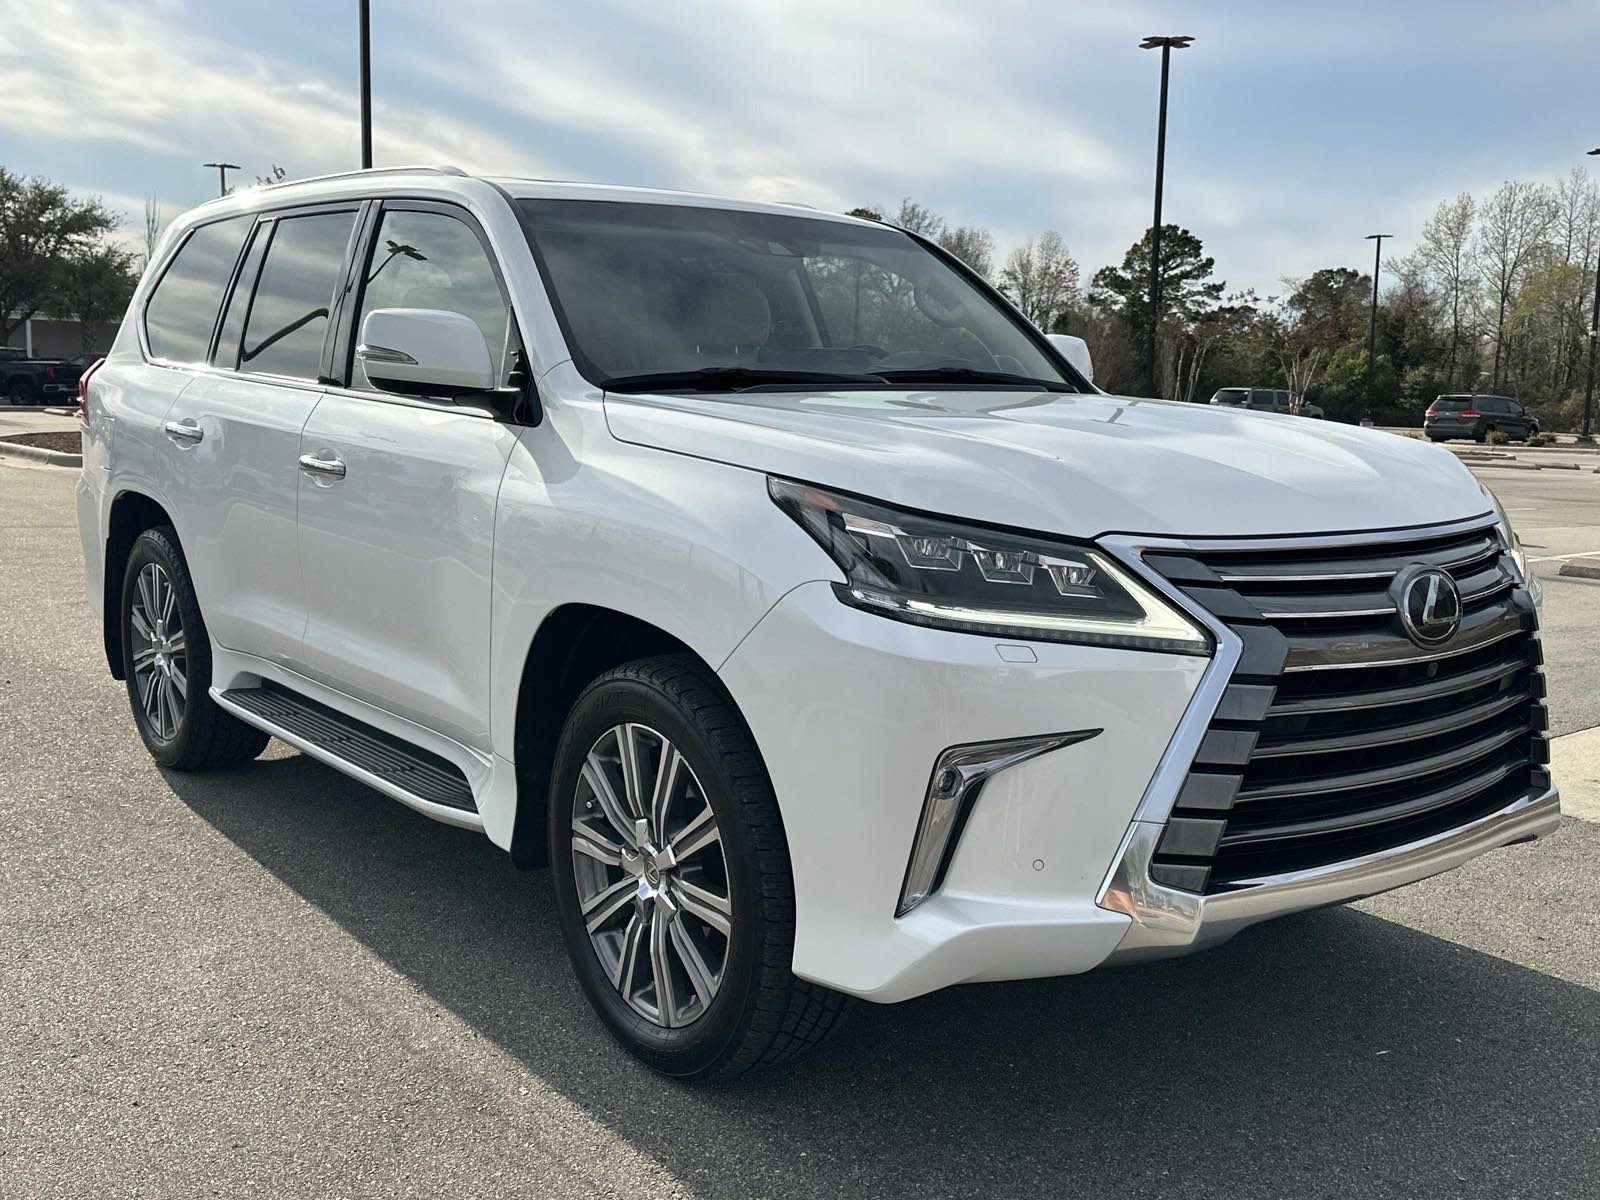 Pre-Owned 2017 Lexus LX LX 570 SUV in Cary #P21550 | Hendrick Dodge Cary